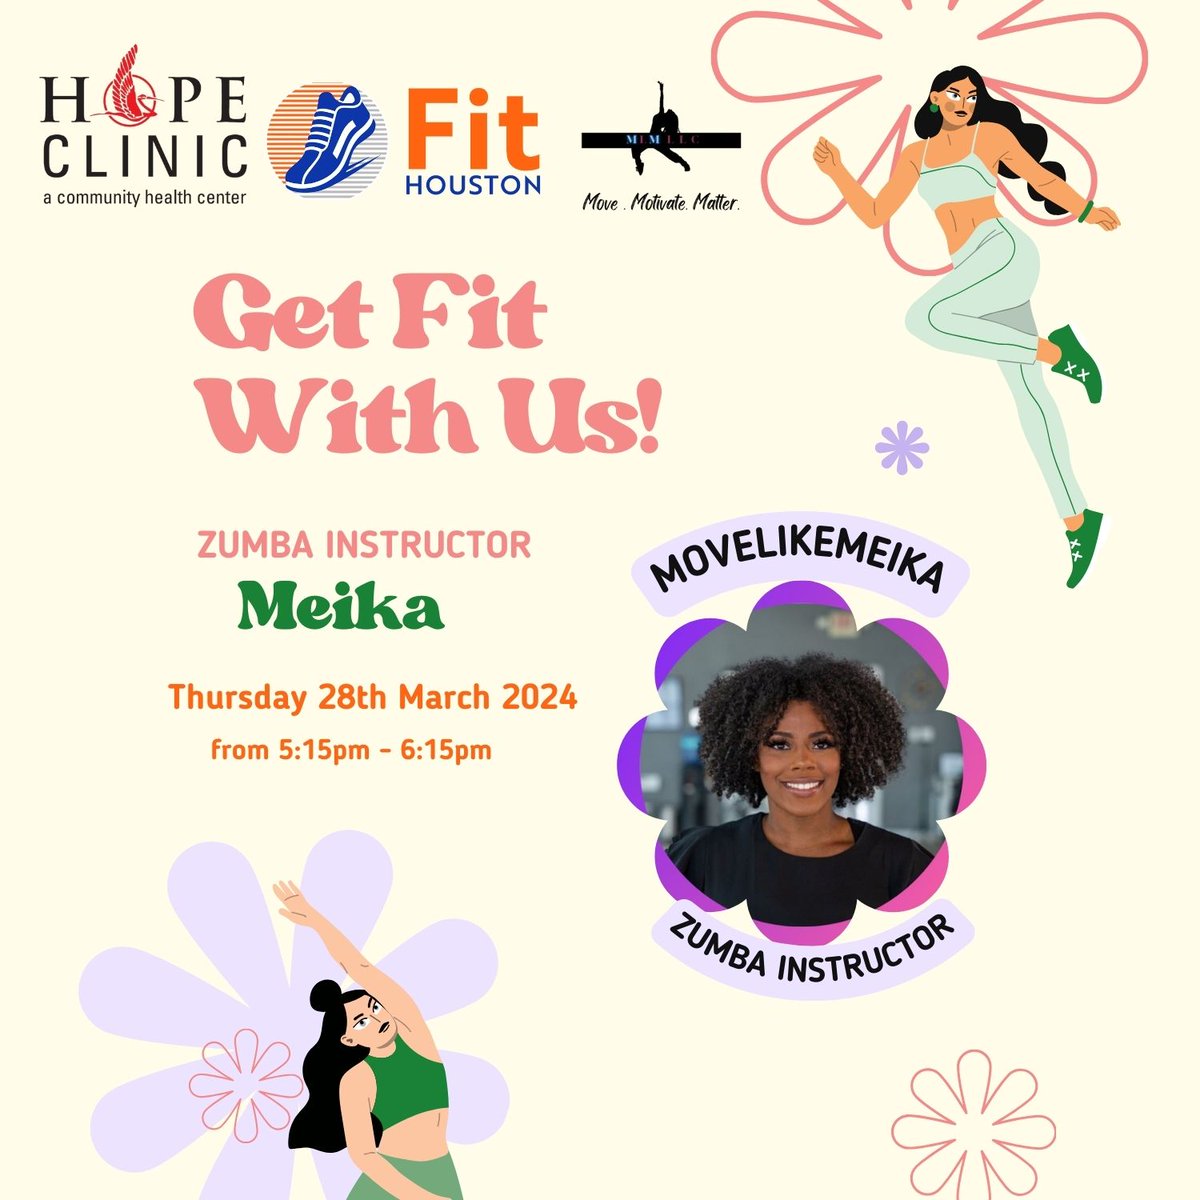 TODAY: 📢 We have a special guest, Meika, joining us for today's Zumba classes at 5:15 pm at our HOPE Alief location! Huge thanks to Houston Fit @Houstonfit @movelikemeika for their support in making this event possible. #Zumba #CommunityFitness #HOPEClinic #HoustonFit